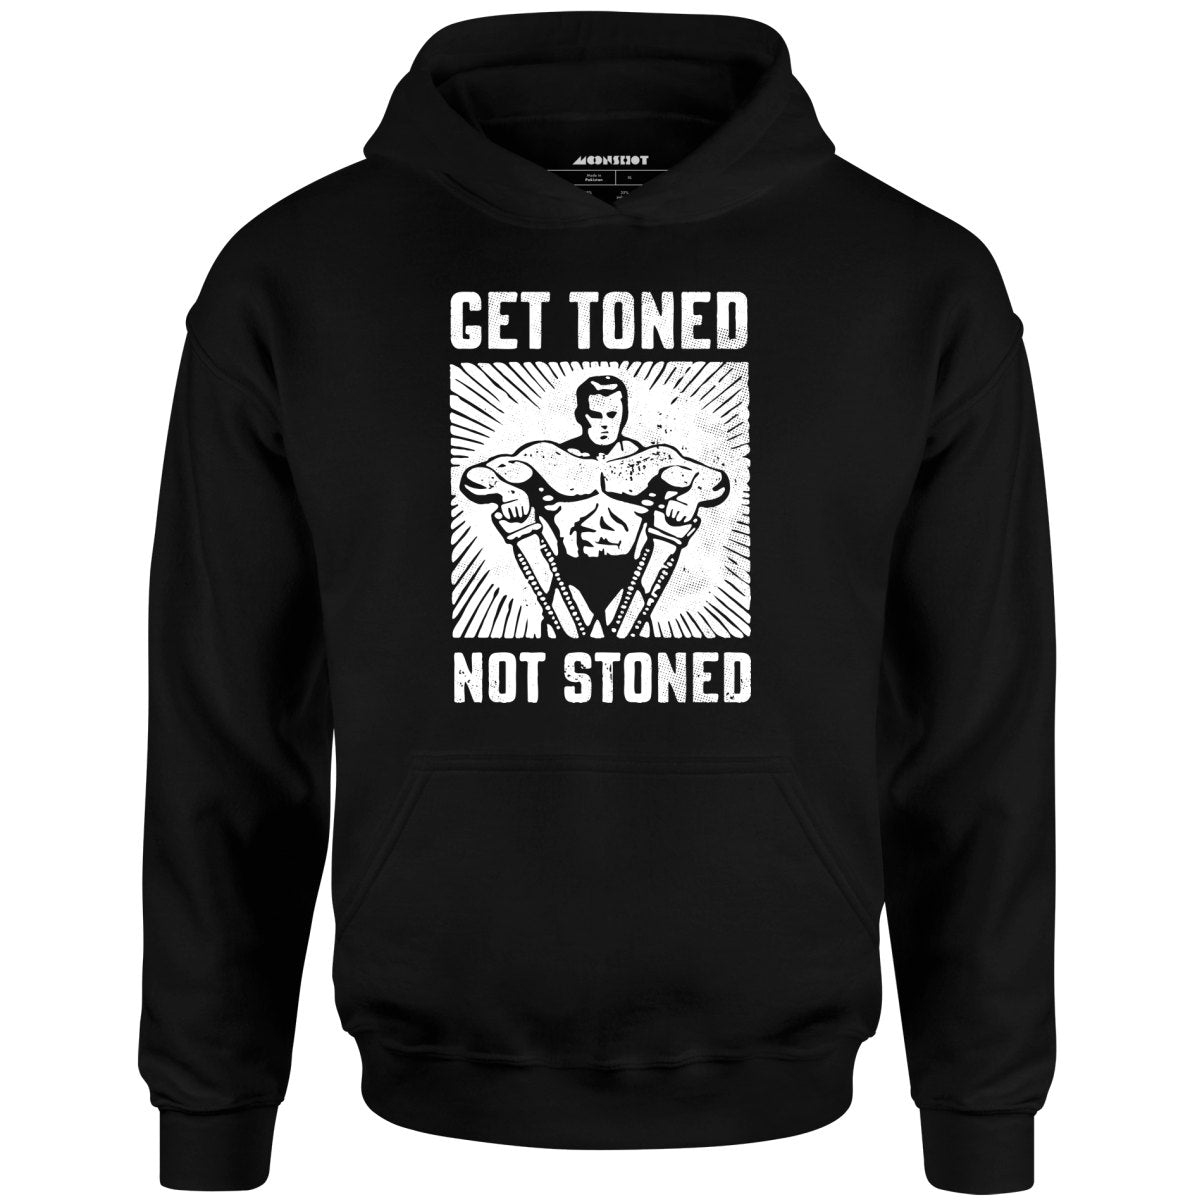 Get Toned Not Stoned - Unisex Hoodie